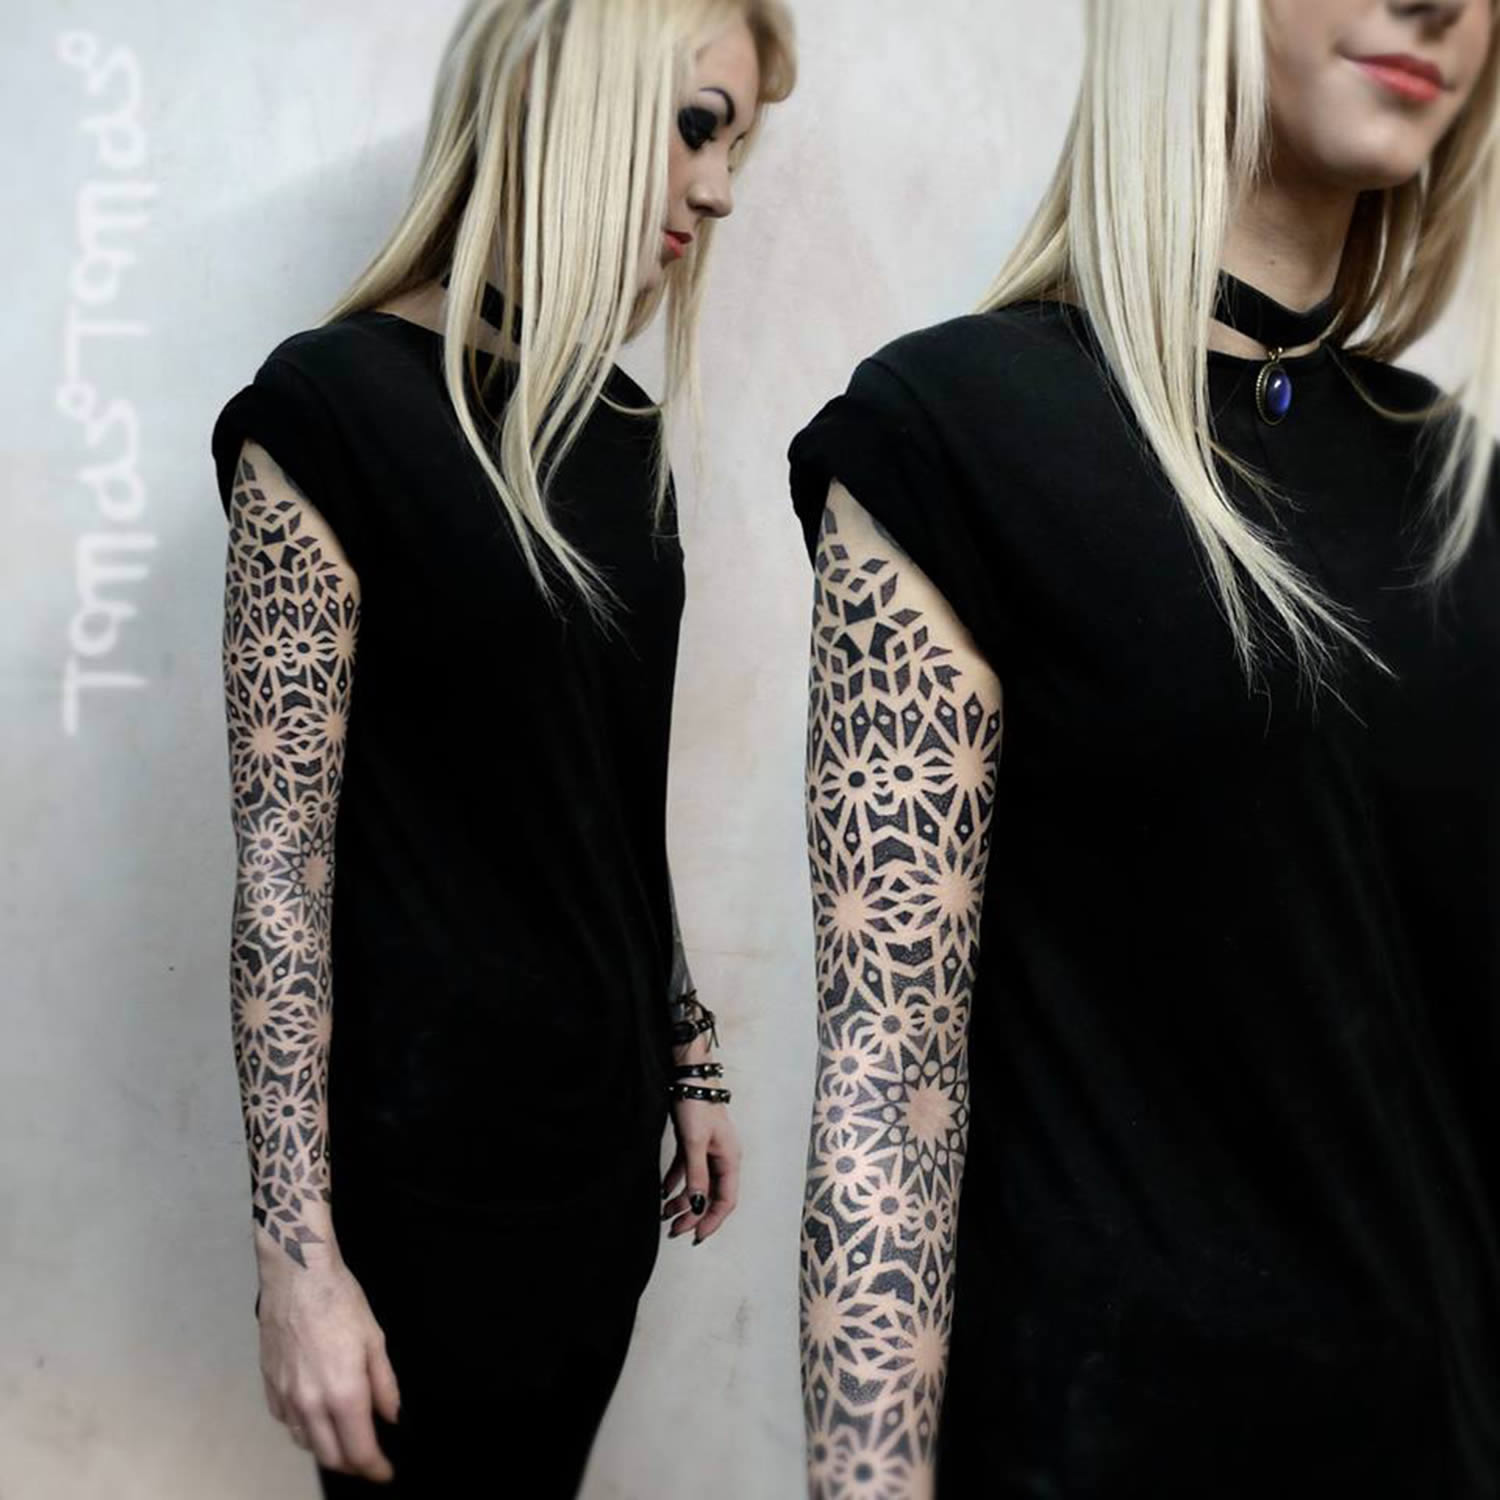 blonde girl with black tattoo on arm